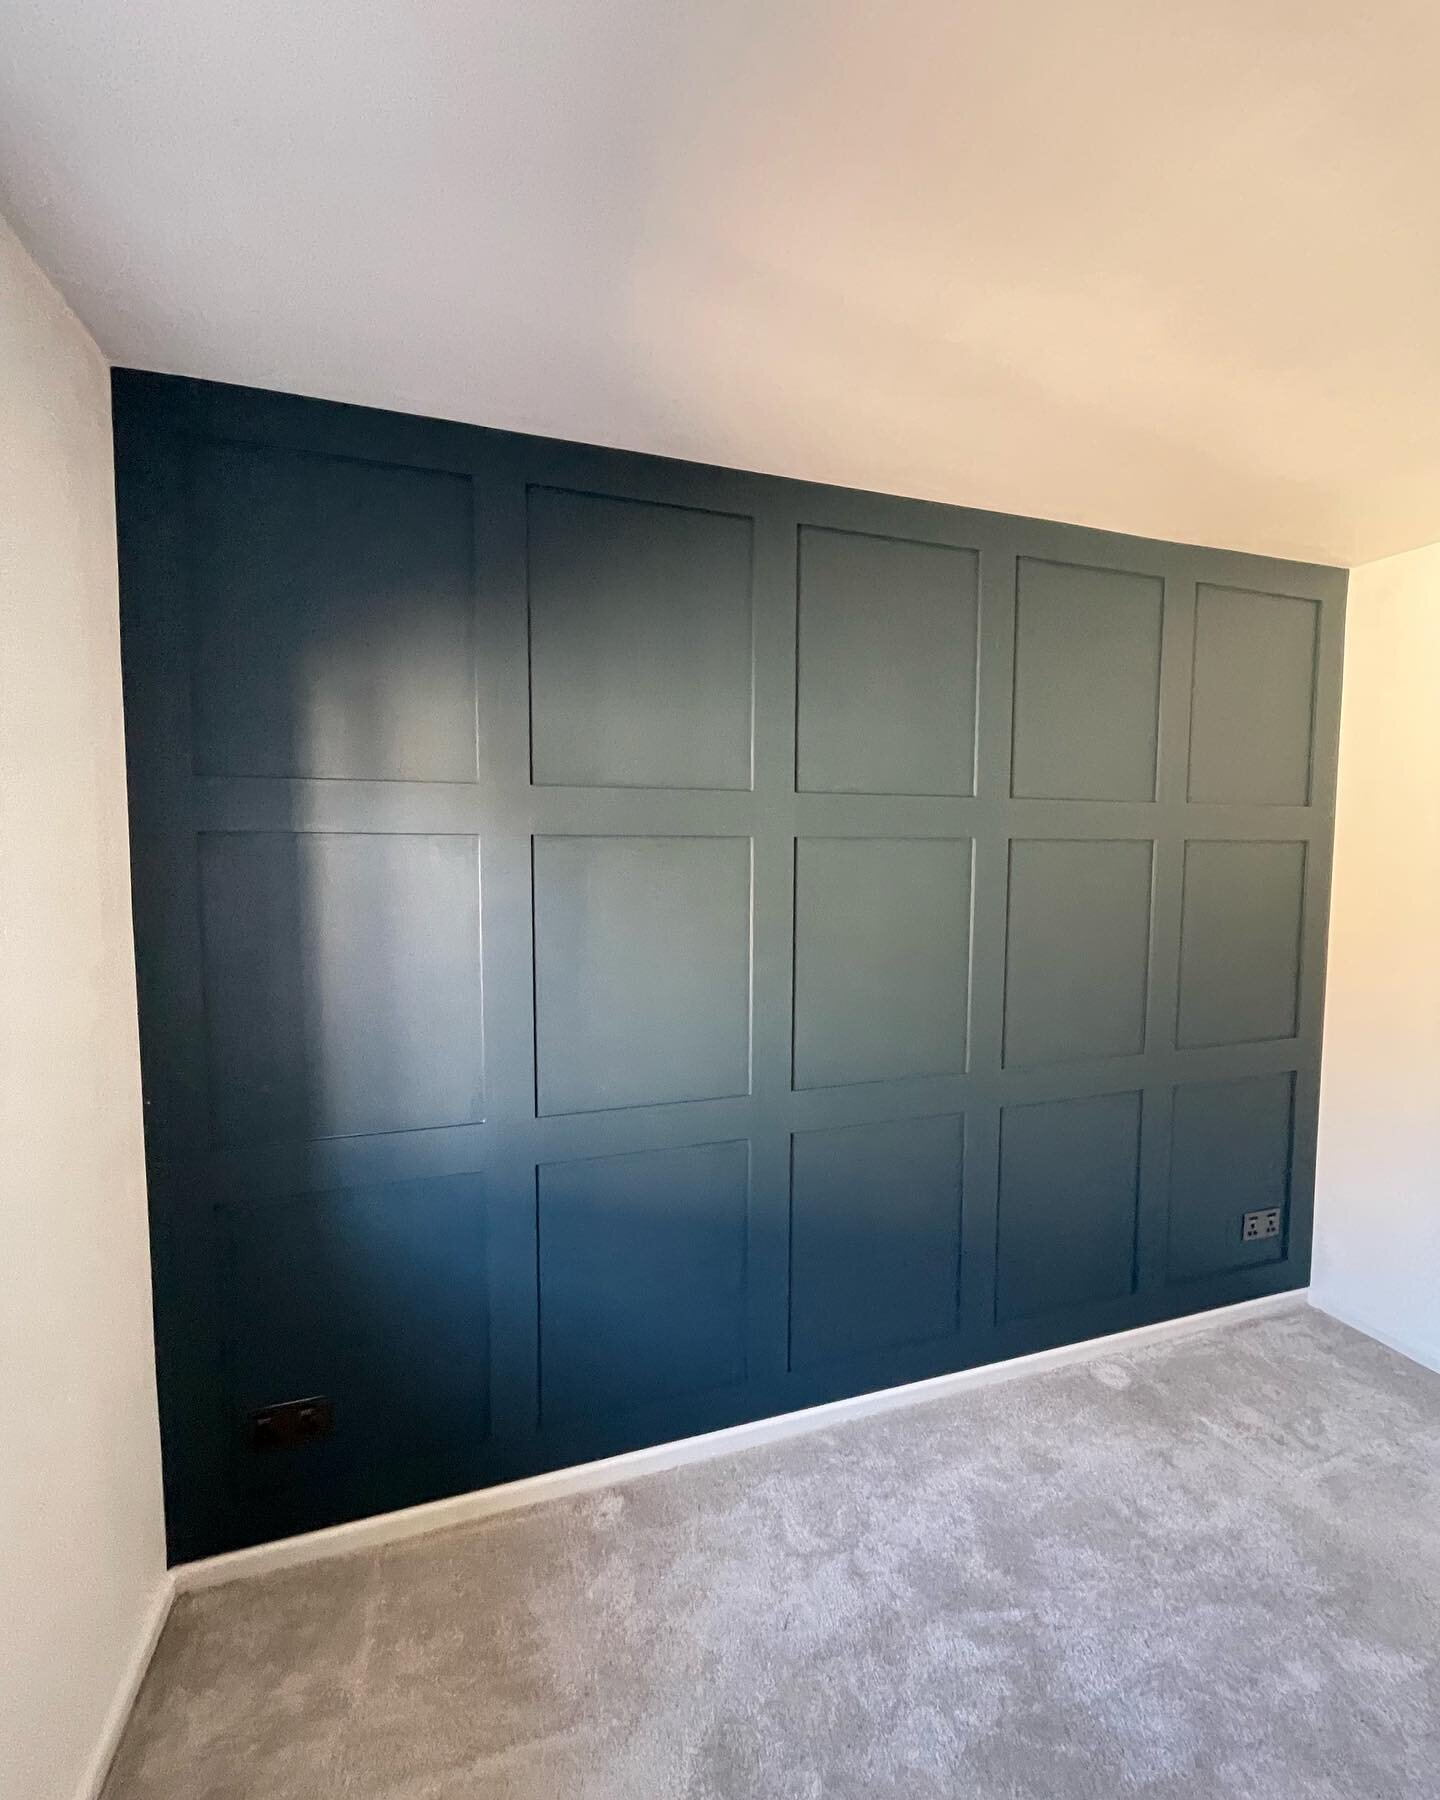 A nice transformation with some shaker wall panelling to update this bedroom 🤩 makes a huge difference. 

#panelling #wallpanelling #shakerpanelling #panel #bedroomwalldecor #modern #design #diypanelling #paneling #navyblue #navybluepanelling #featu